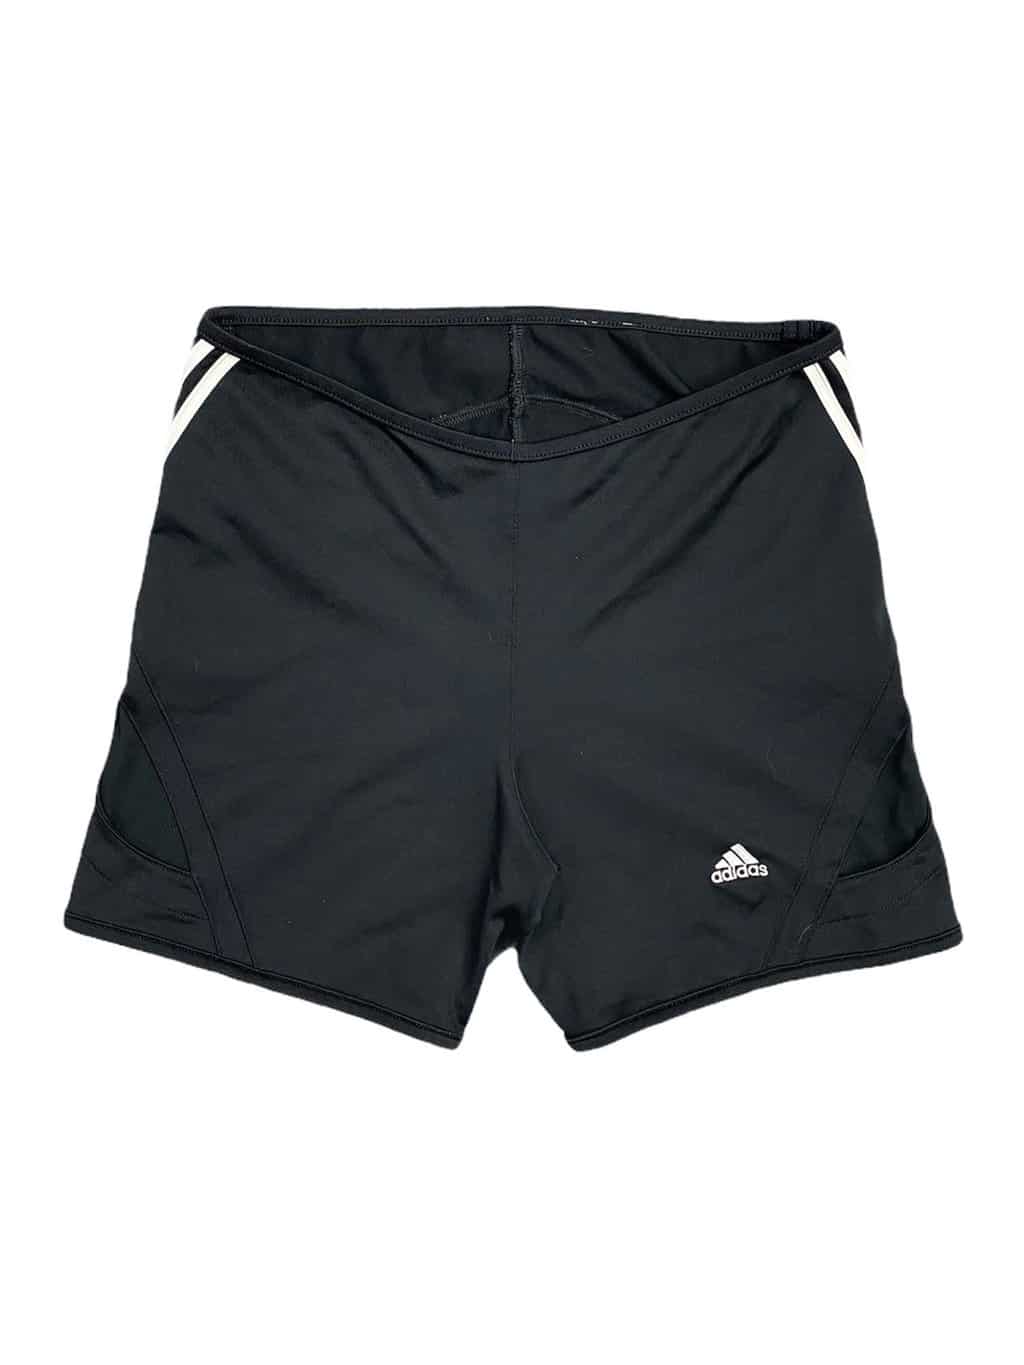 Women's Adidas Booty Shorts in Black with White - XS/S - St Cyr Vintage